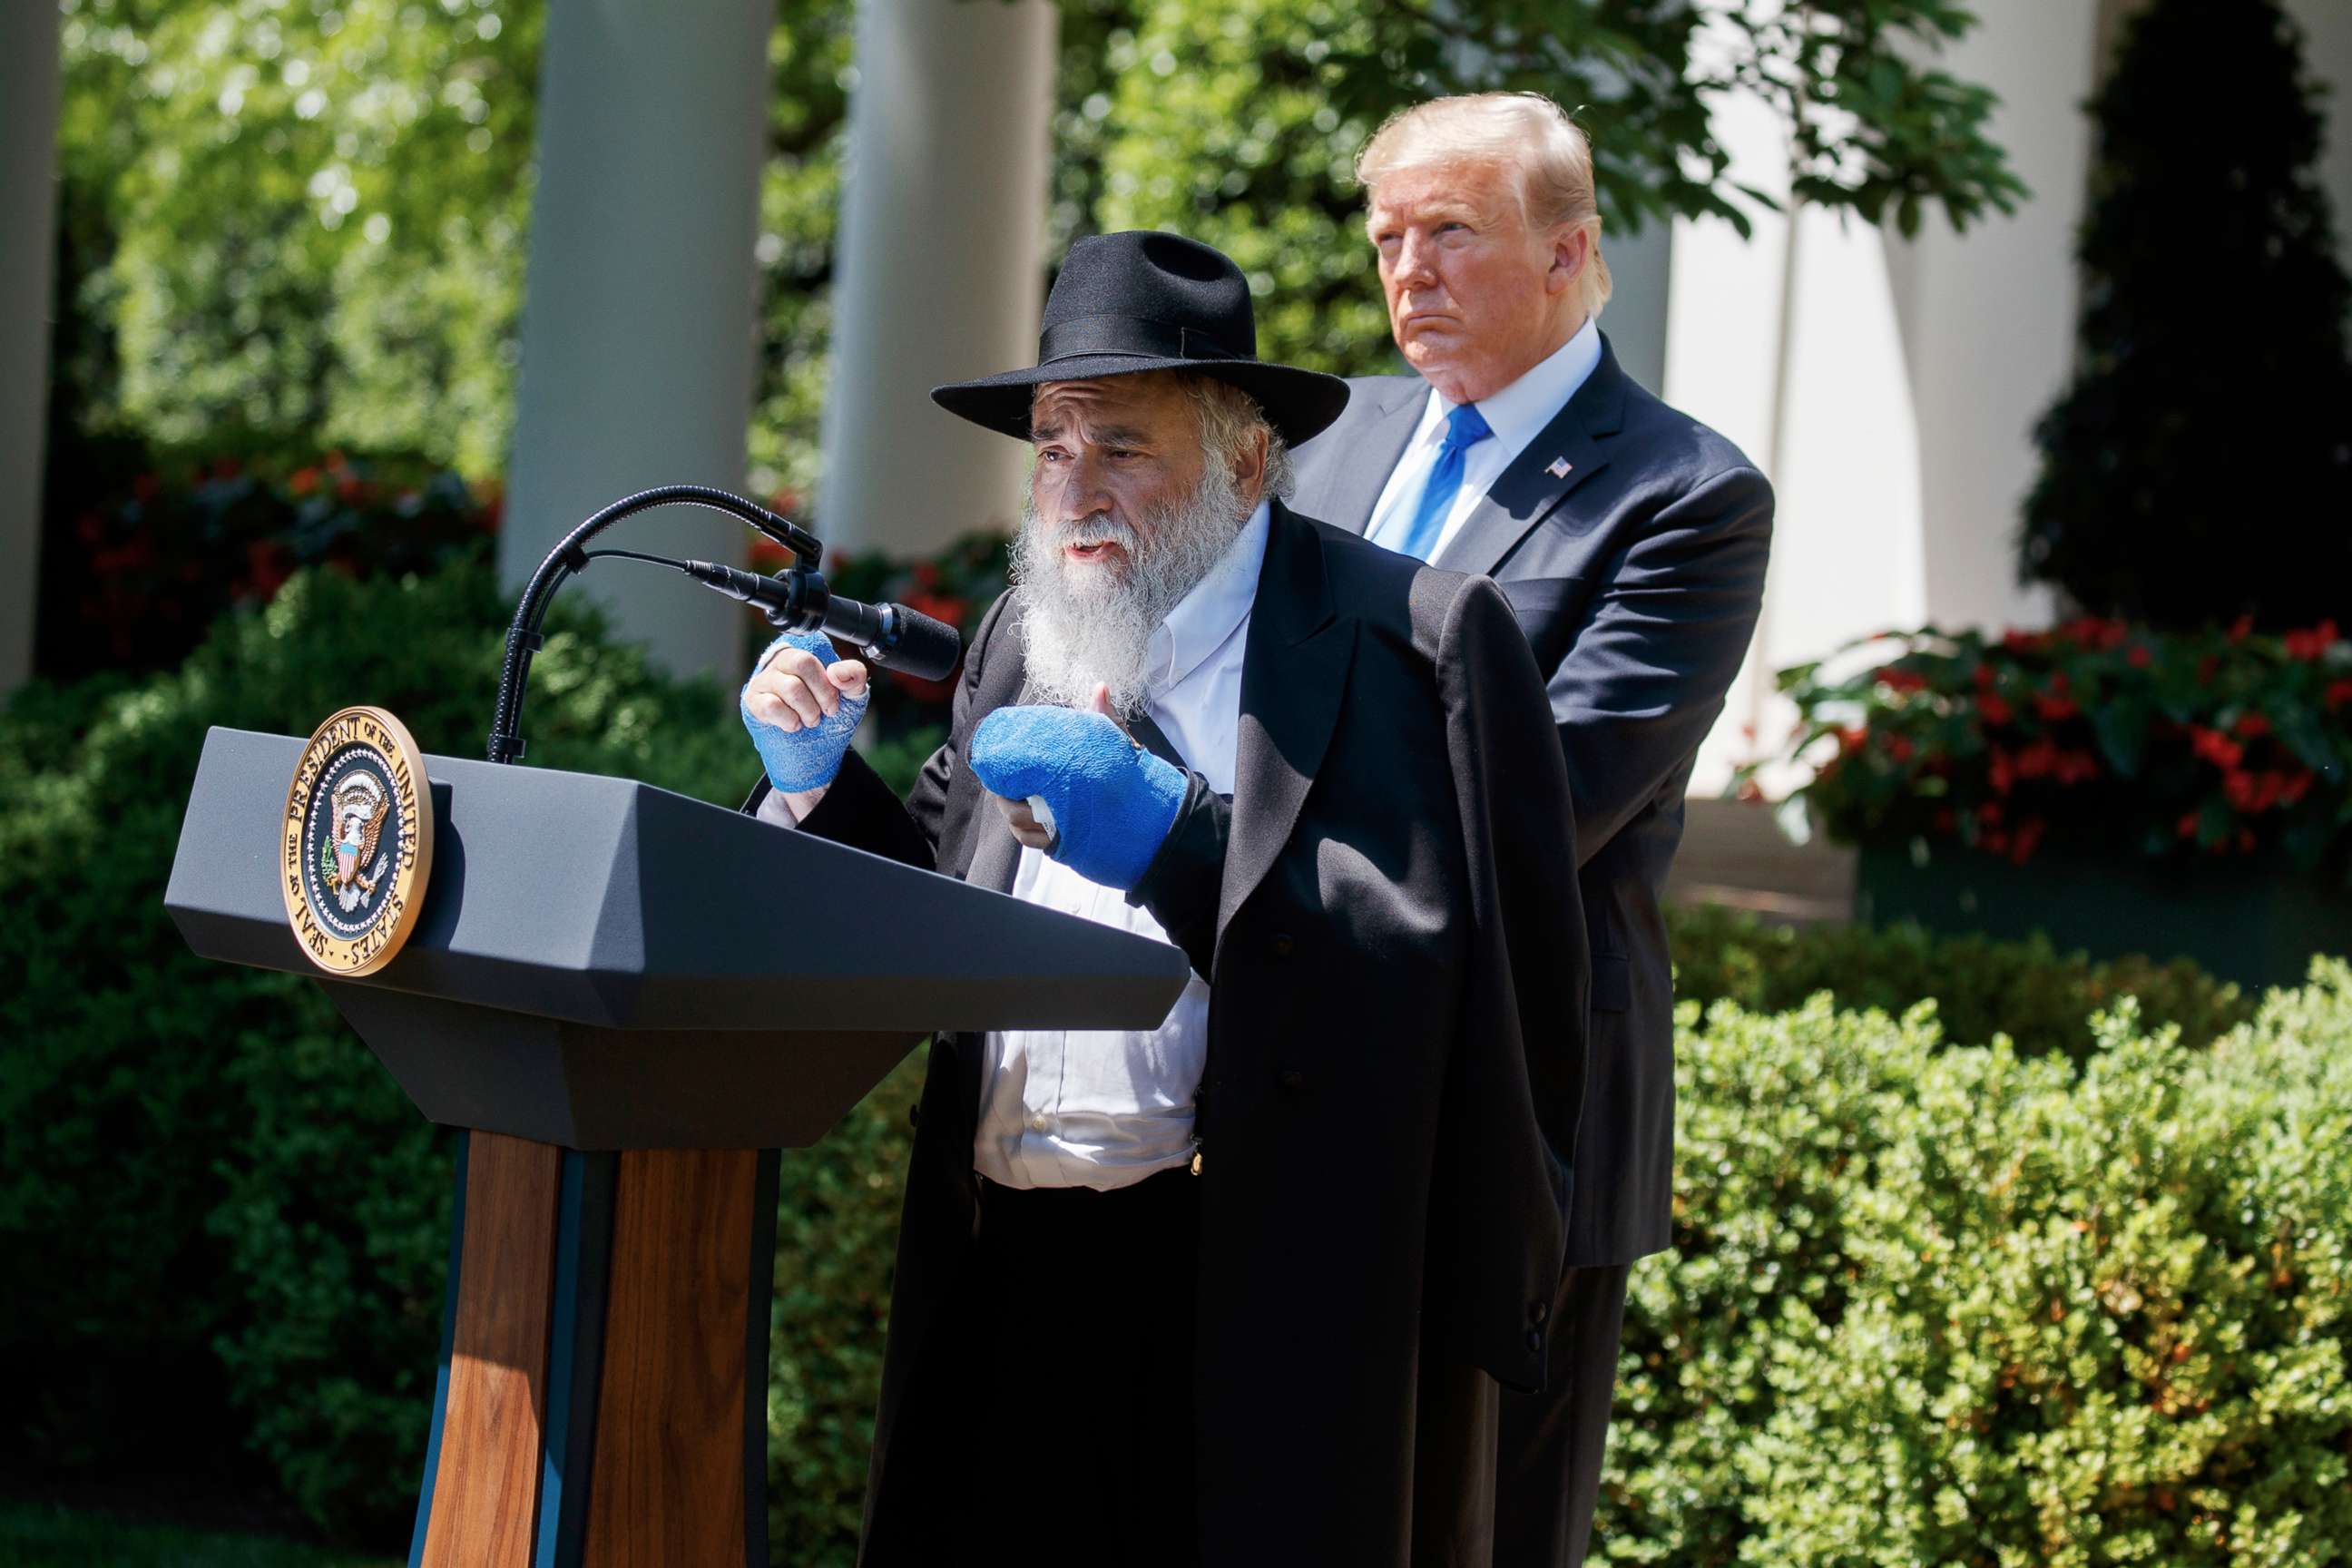 PHOTO: President Donald Trump looks on as Rabbi Yisroel Goldstein, survivor of the Poway, Calif synagogue shooting, speaks during a National Day of Prayer event in the Rose Garden of the White House, Thursday, May 2, 2019, in Washington.